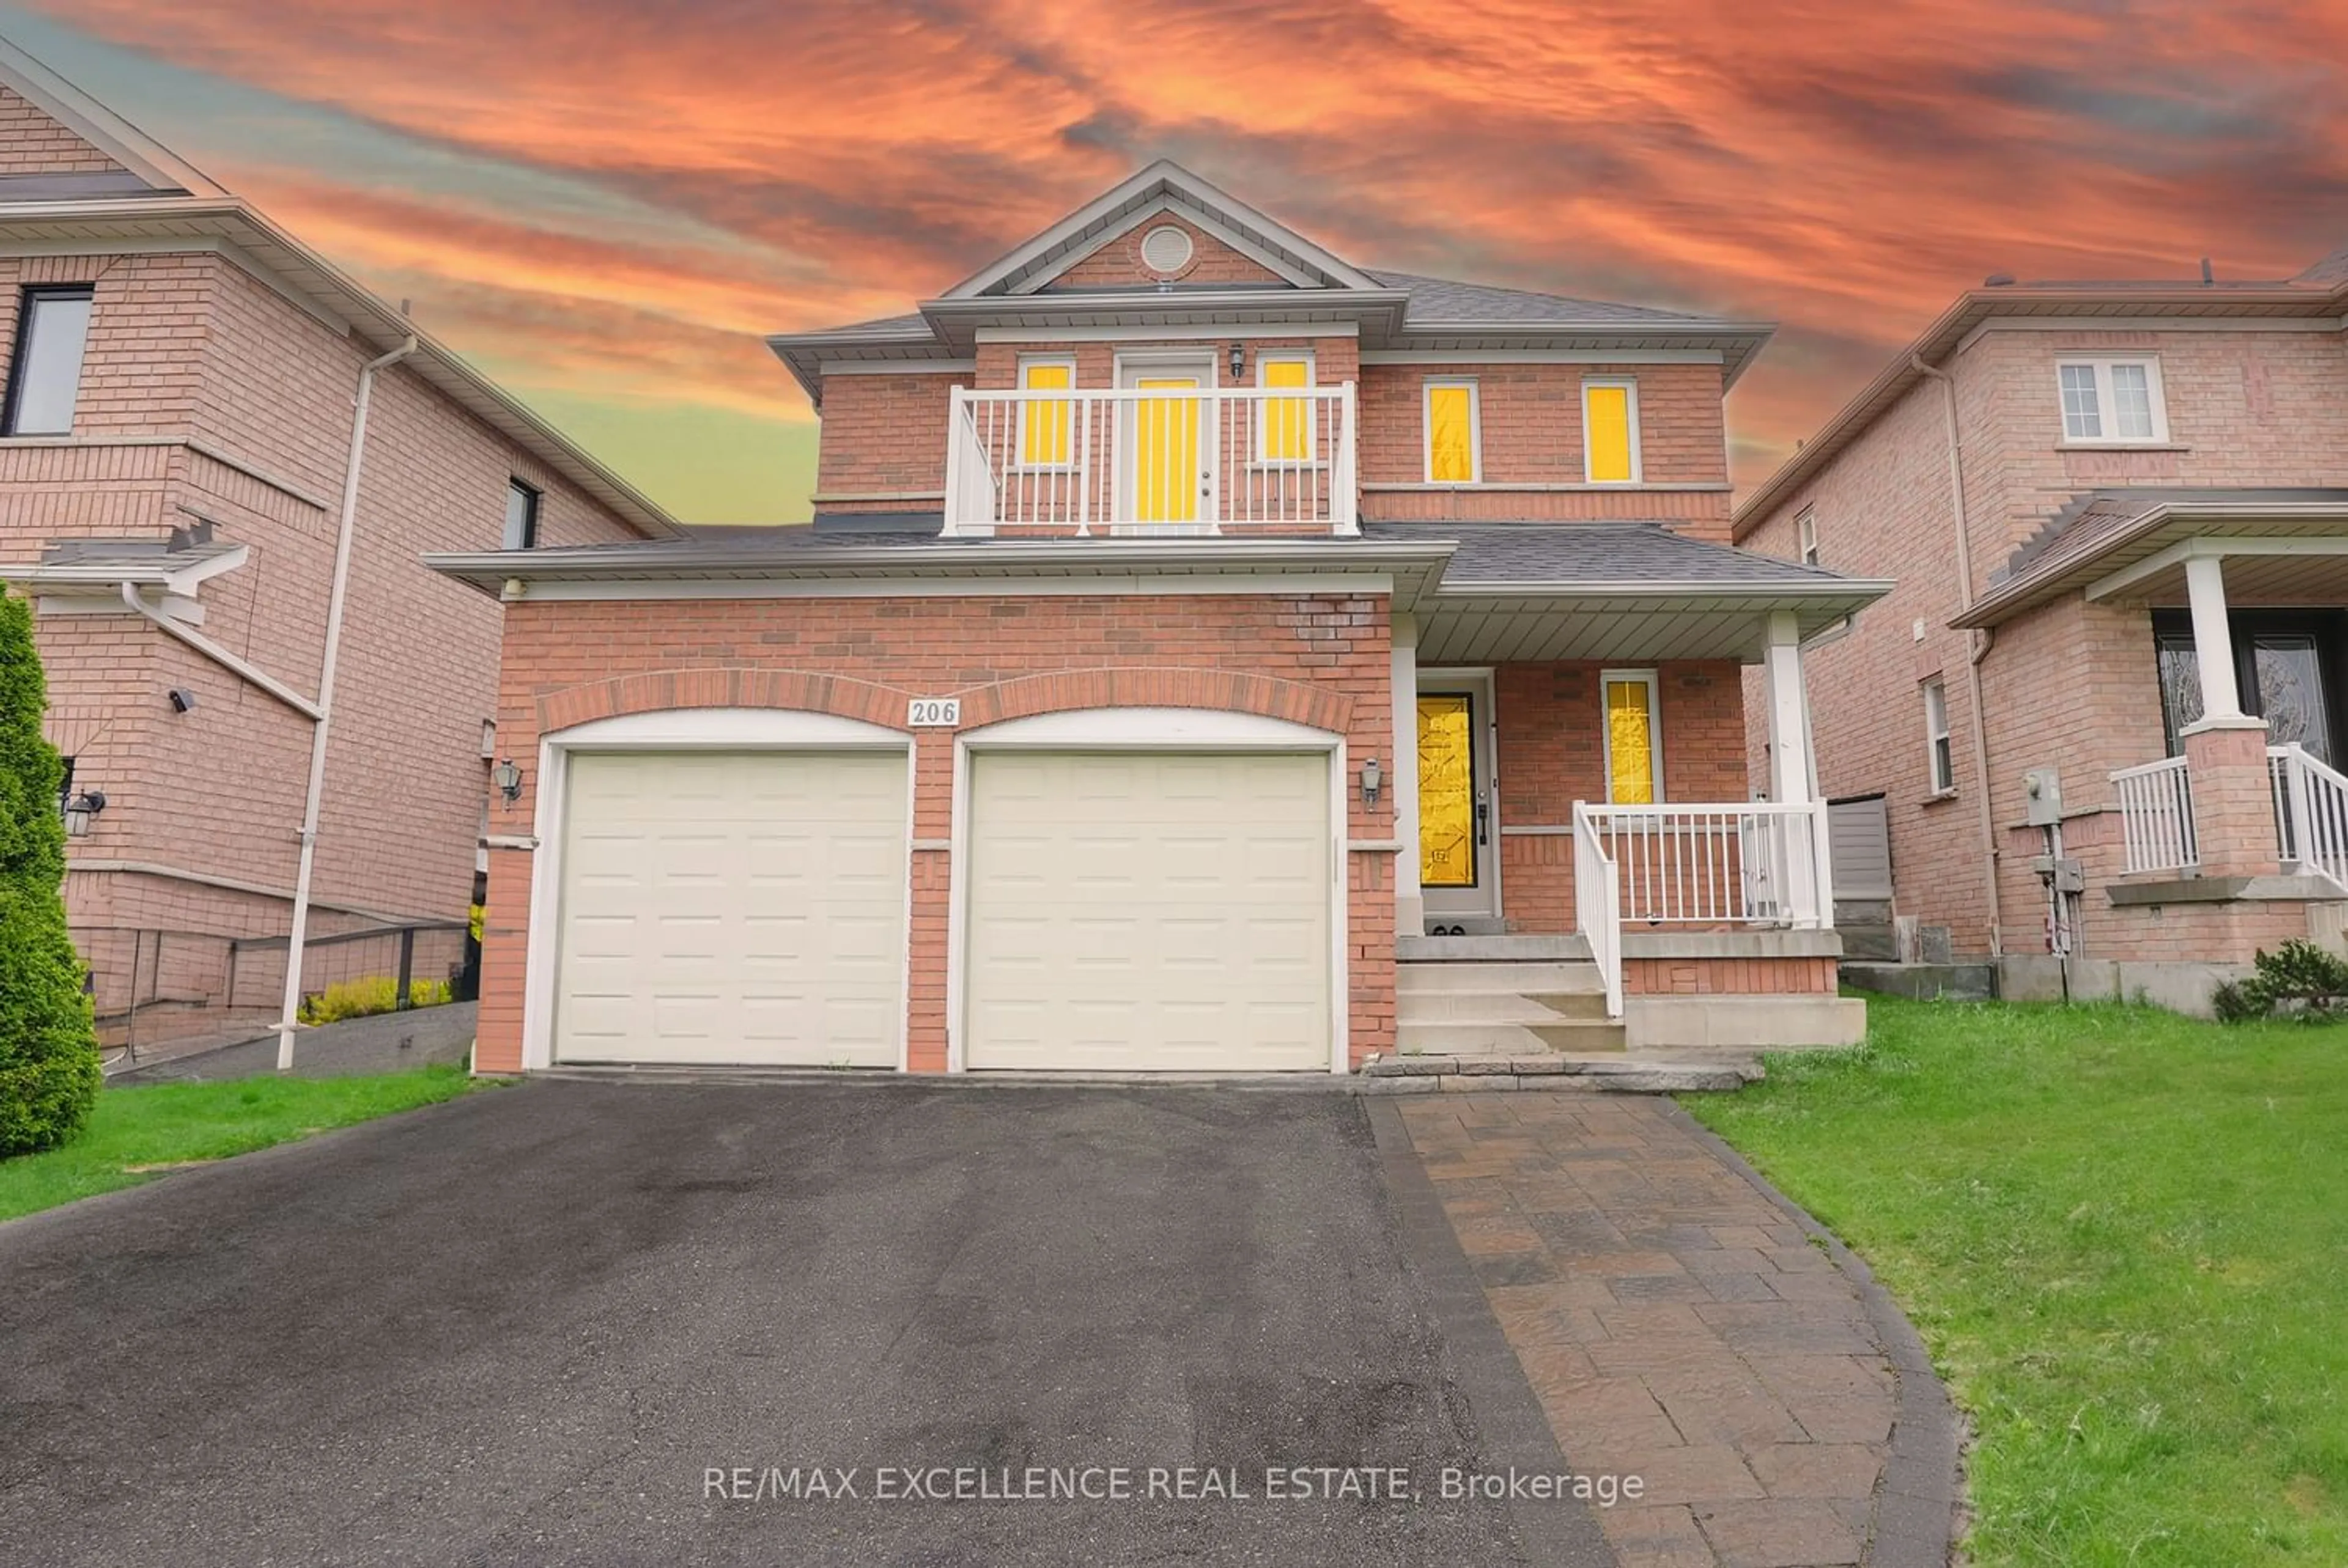 Frontside or backside of a home for 206 Drummond Dr, Vaughan Ontario L6A 3E2